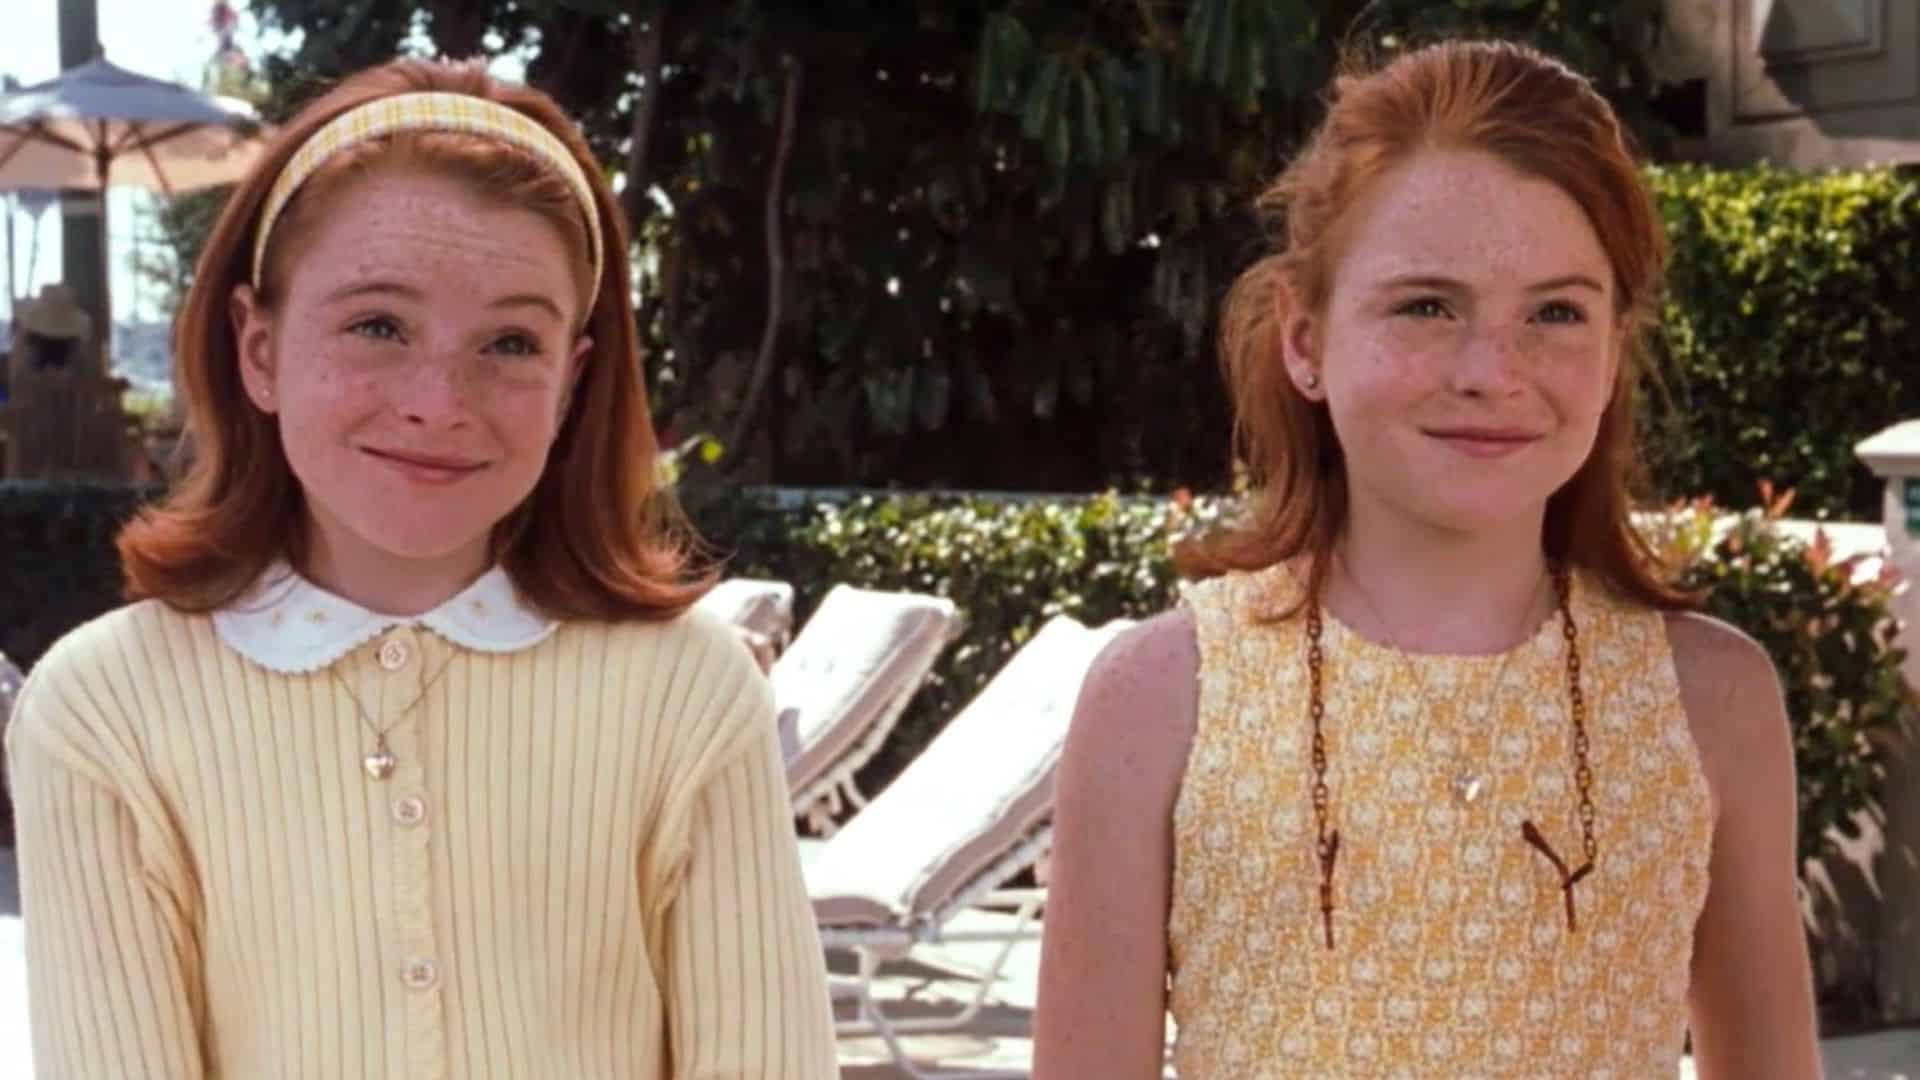 Double Lindsay Lohans posing together in yellow outfits in this image from Walt Disney Pictures.